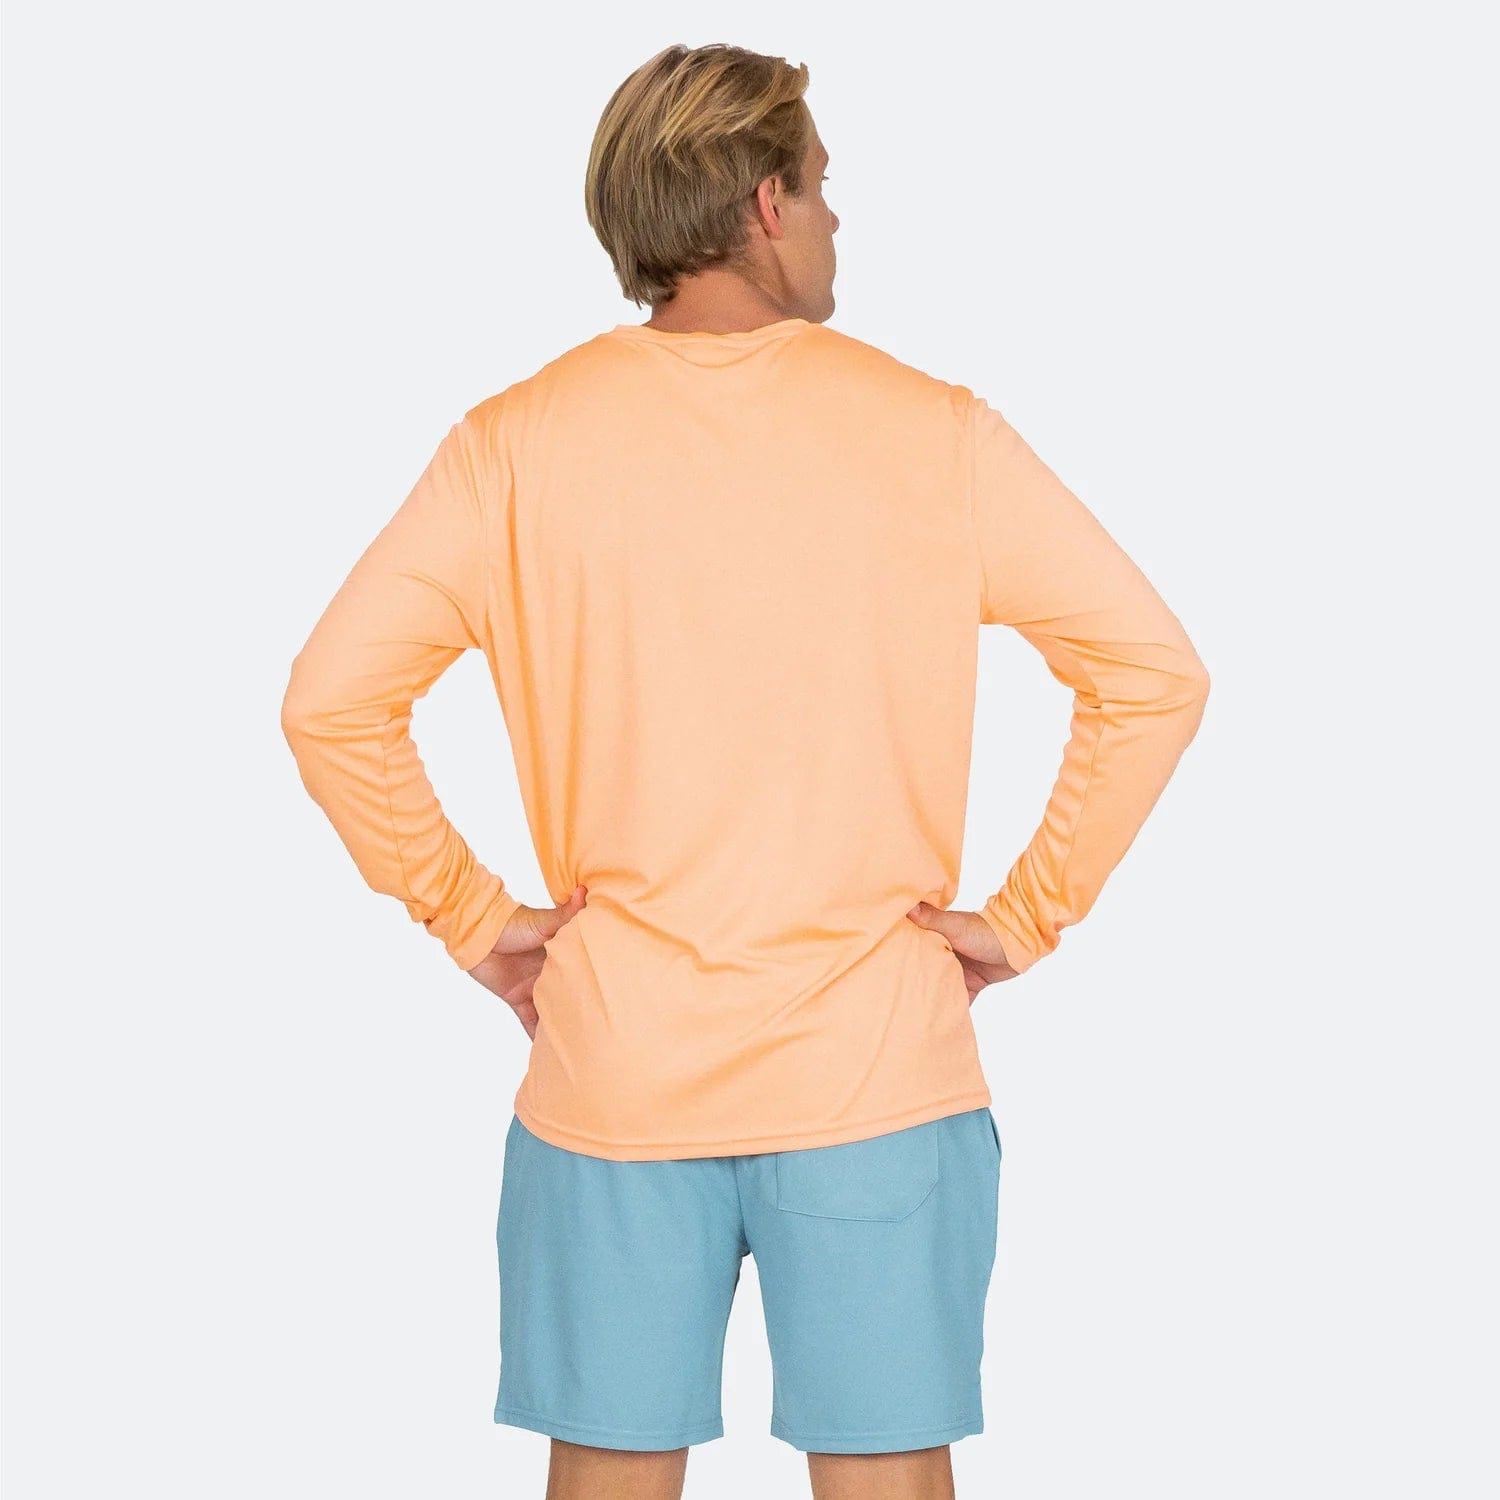 Wholesale Neon Yellow Full Sleeve T-Shirt for Men From Gym Clothes